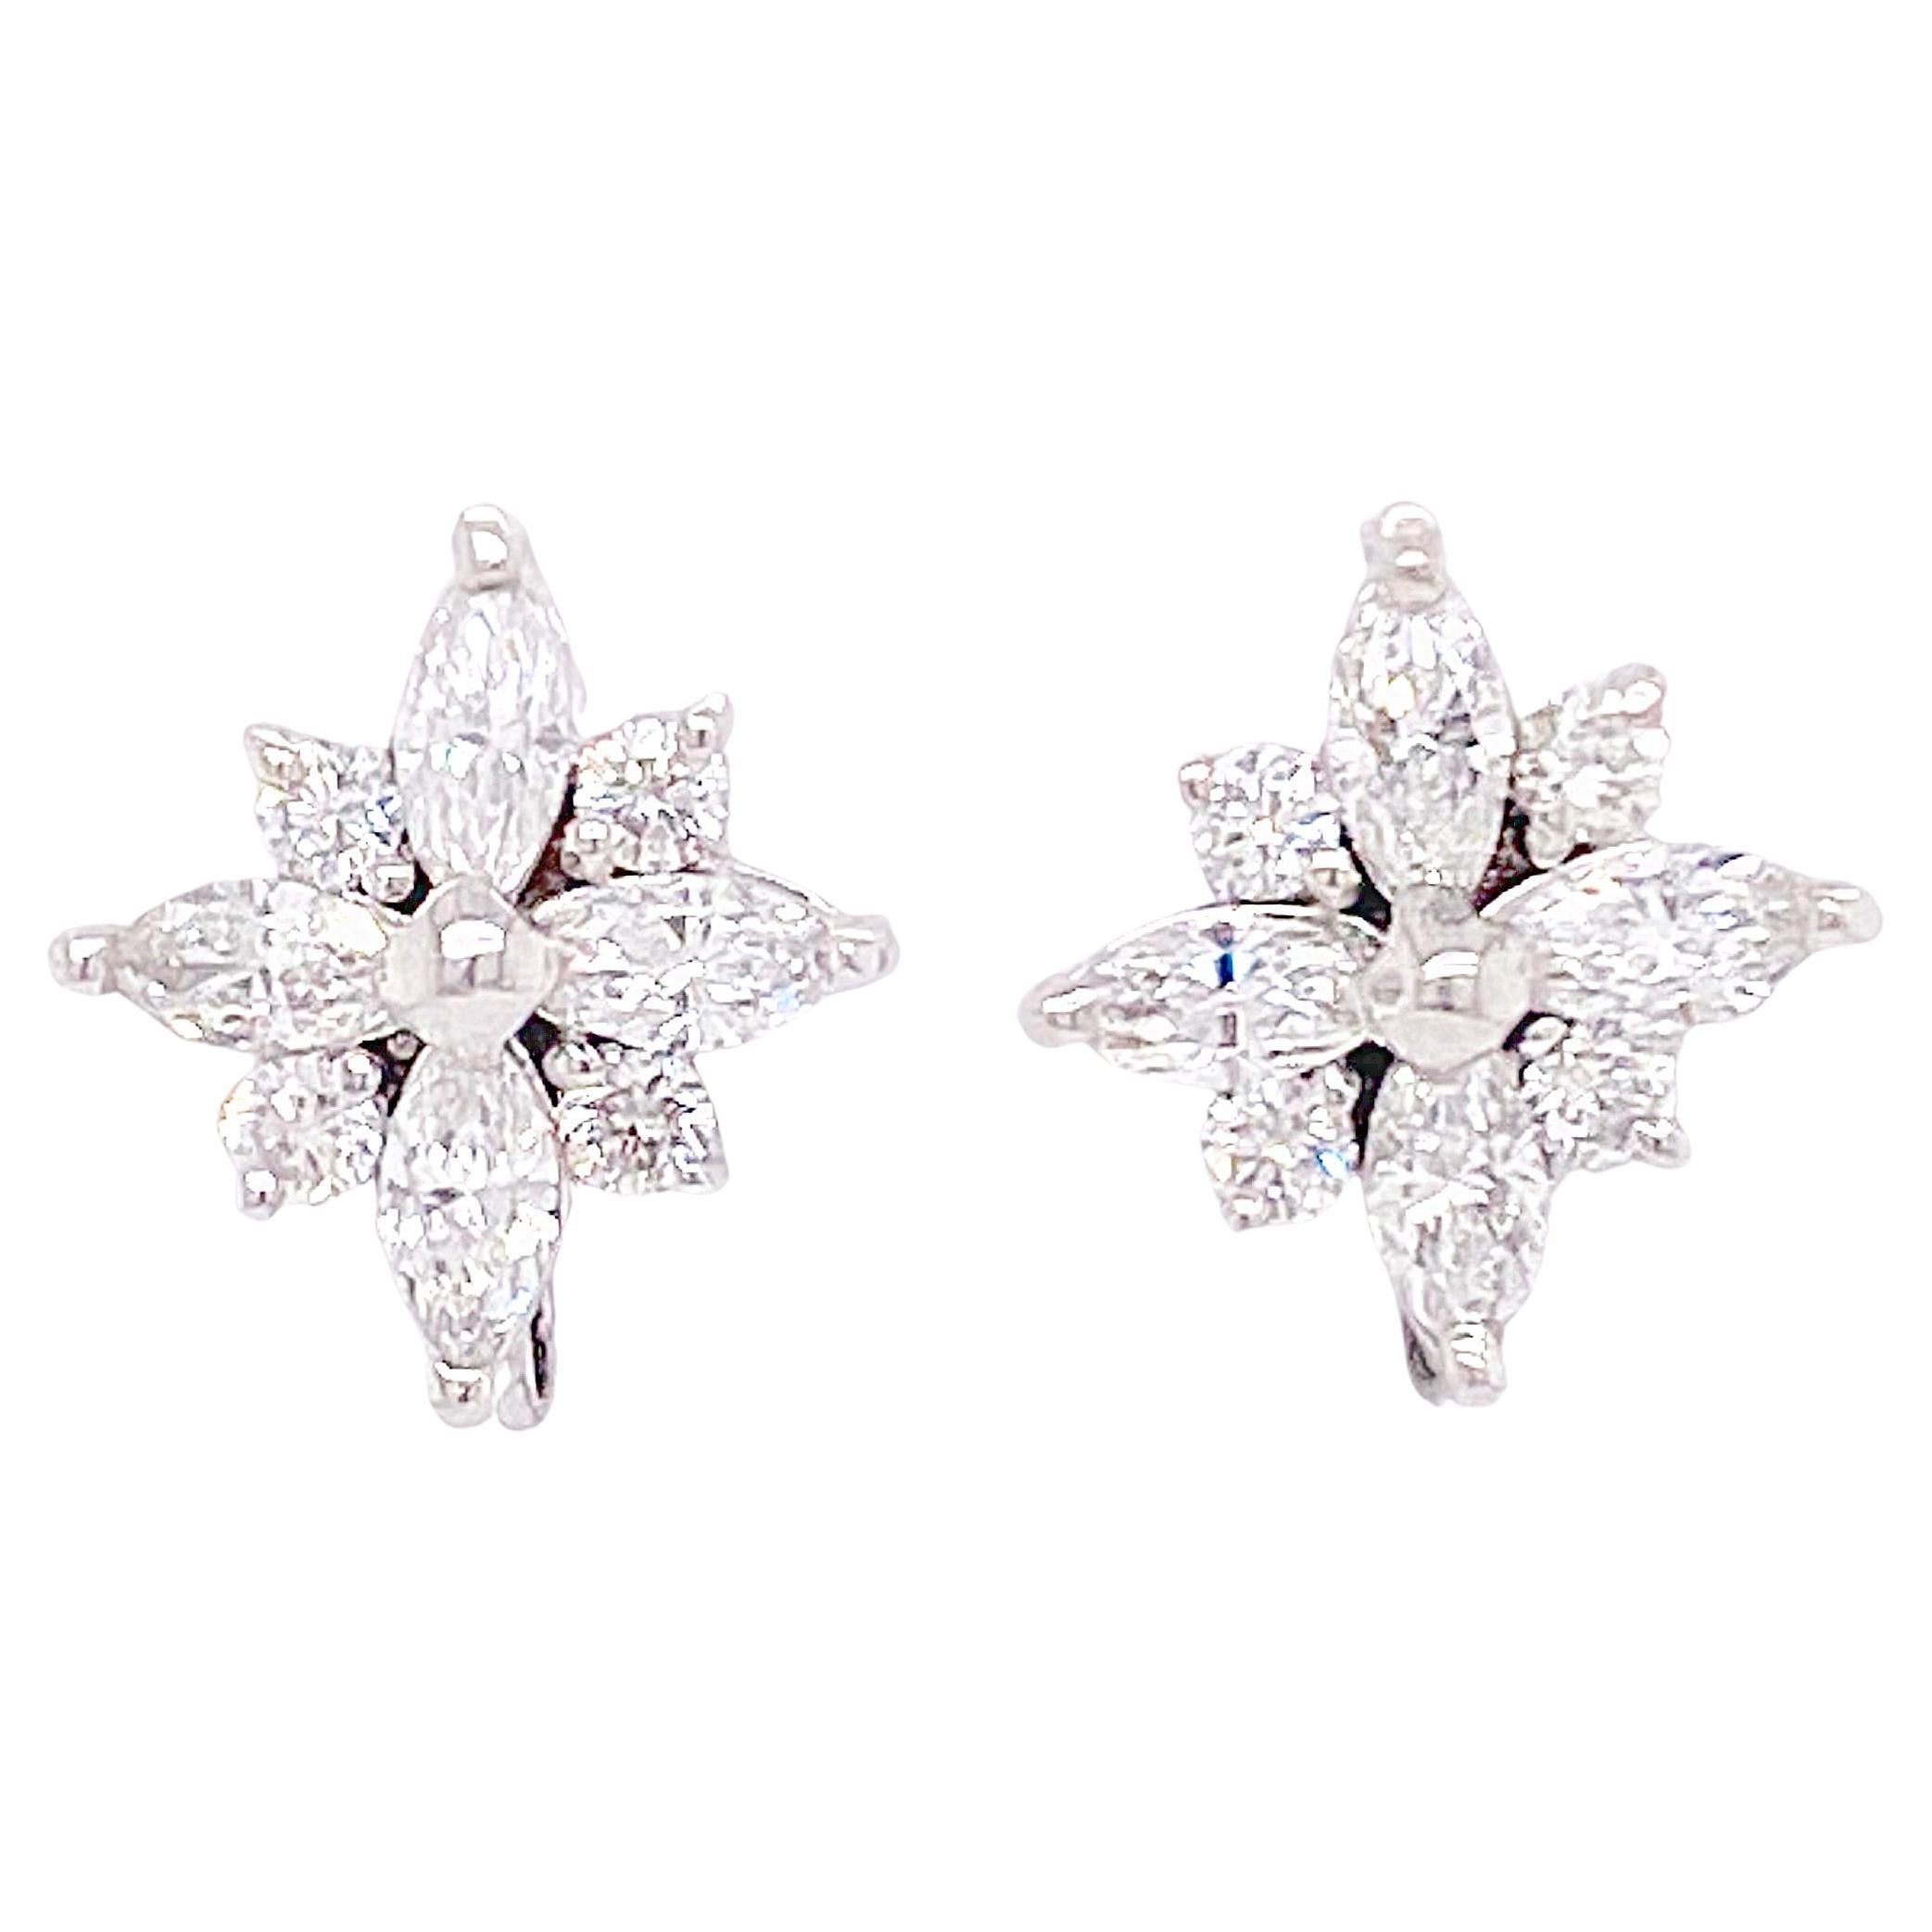 Blossom Diamond Earrings Cluster Star Studs w Convertible Wire for Ear Charms